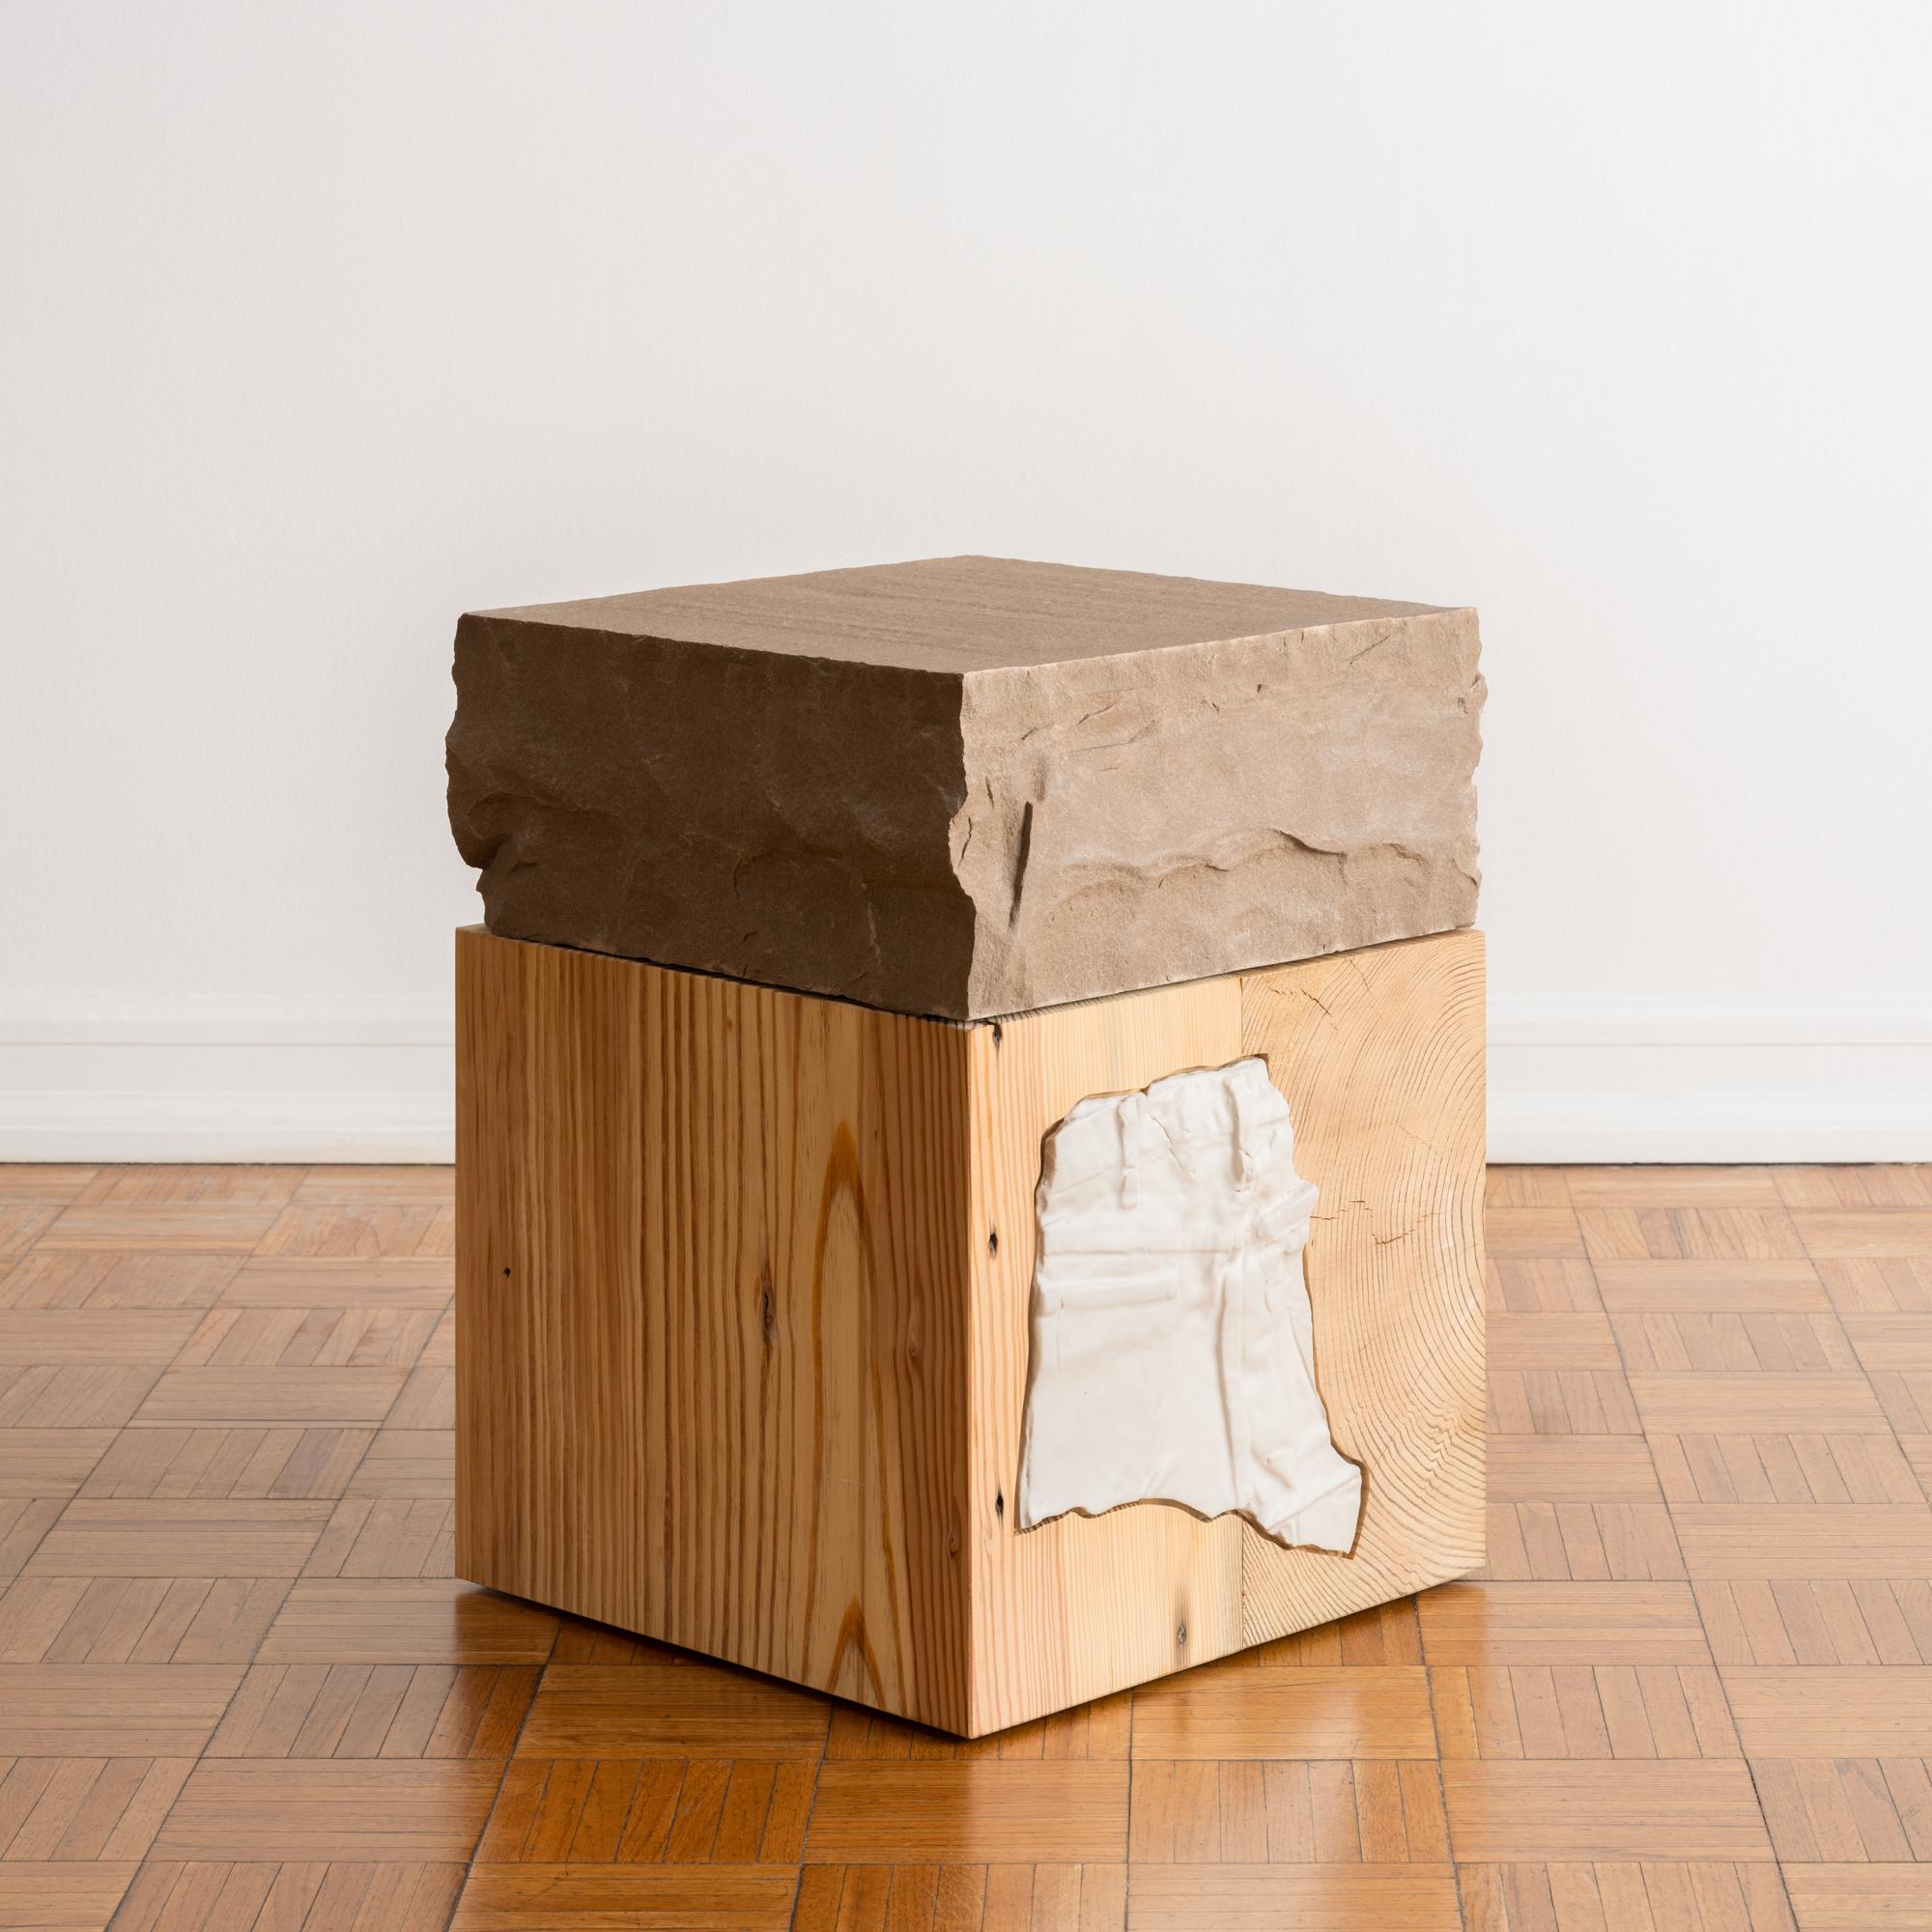 Unique hand-carved sandstone side or end table with reclaimed wood block base and elegant white ceramic tile inlay. Grounded and breathtaking, this piece is the perfect understated sculptural accent to any interior space.

A natural elegance is at